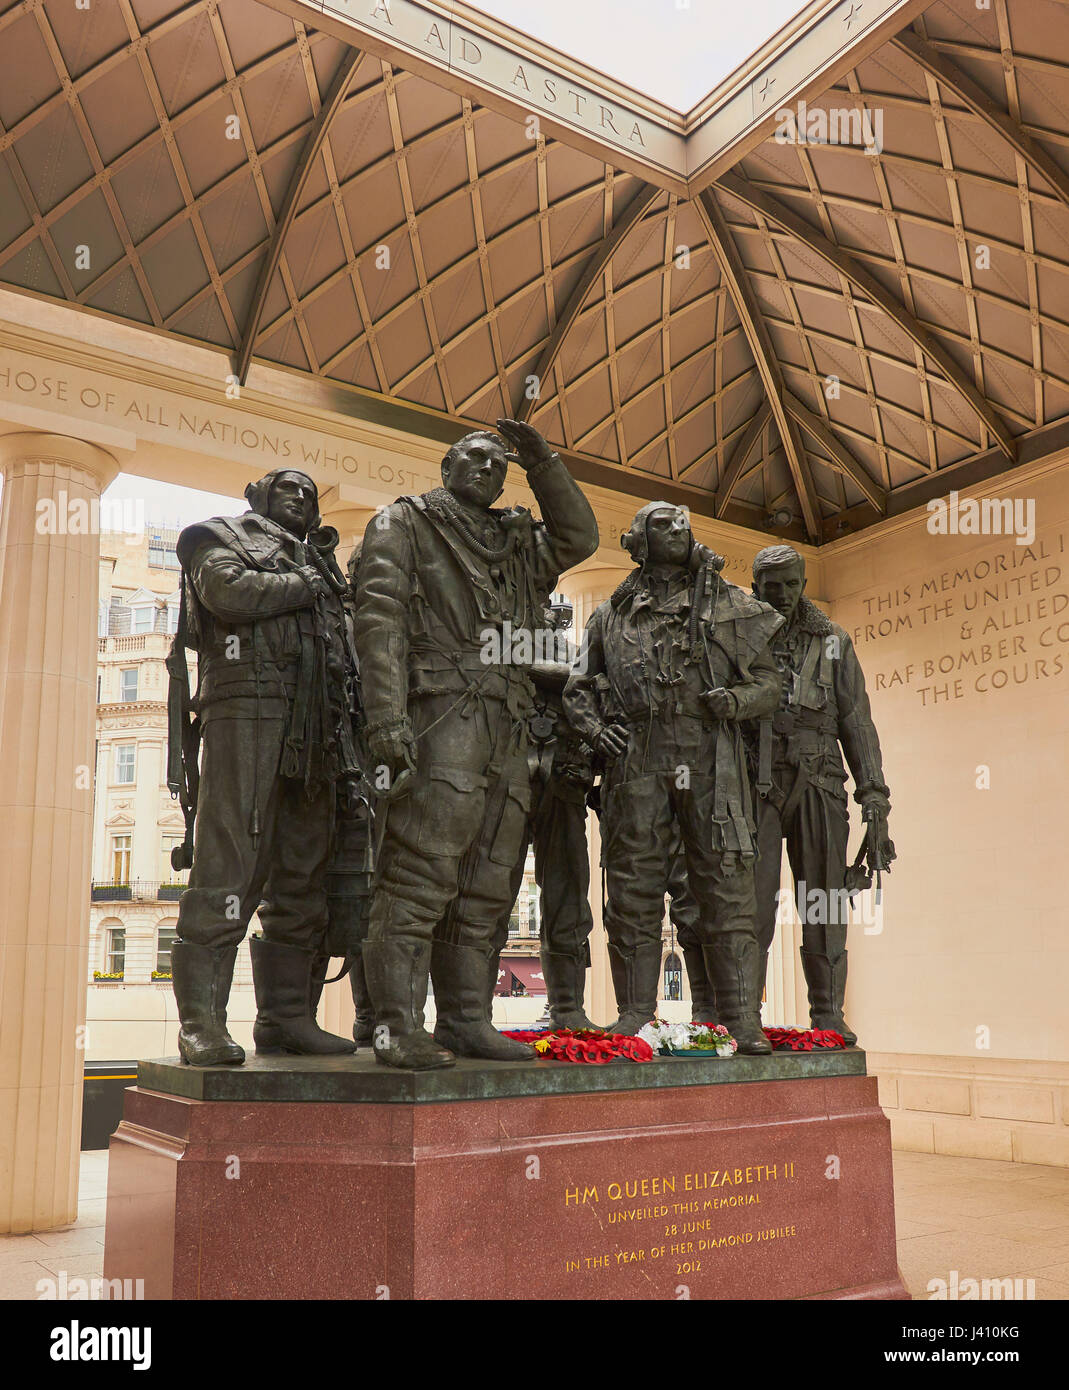 RAF Bomber Command Memorial sculpture by Philip Jackson, Piccadilly, London, England Stock Photo